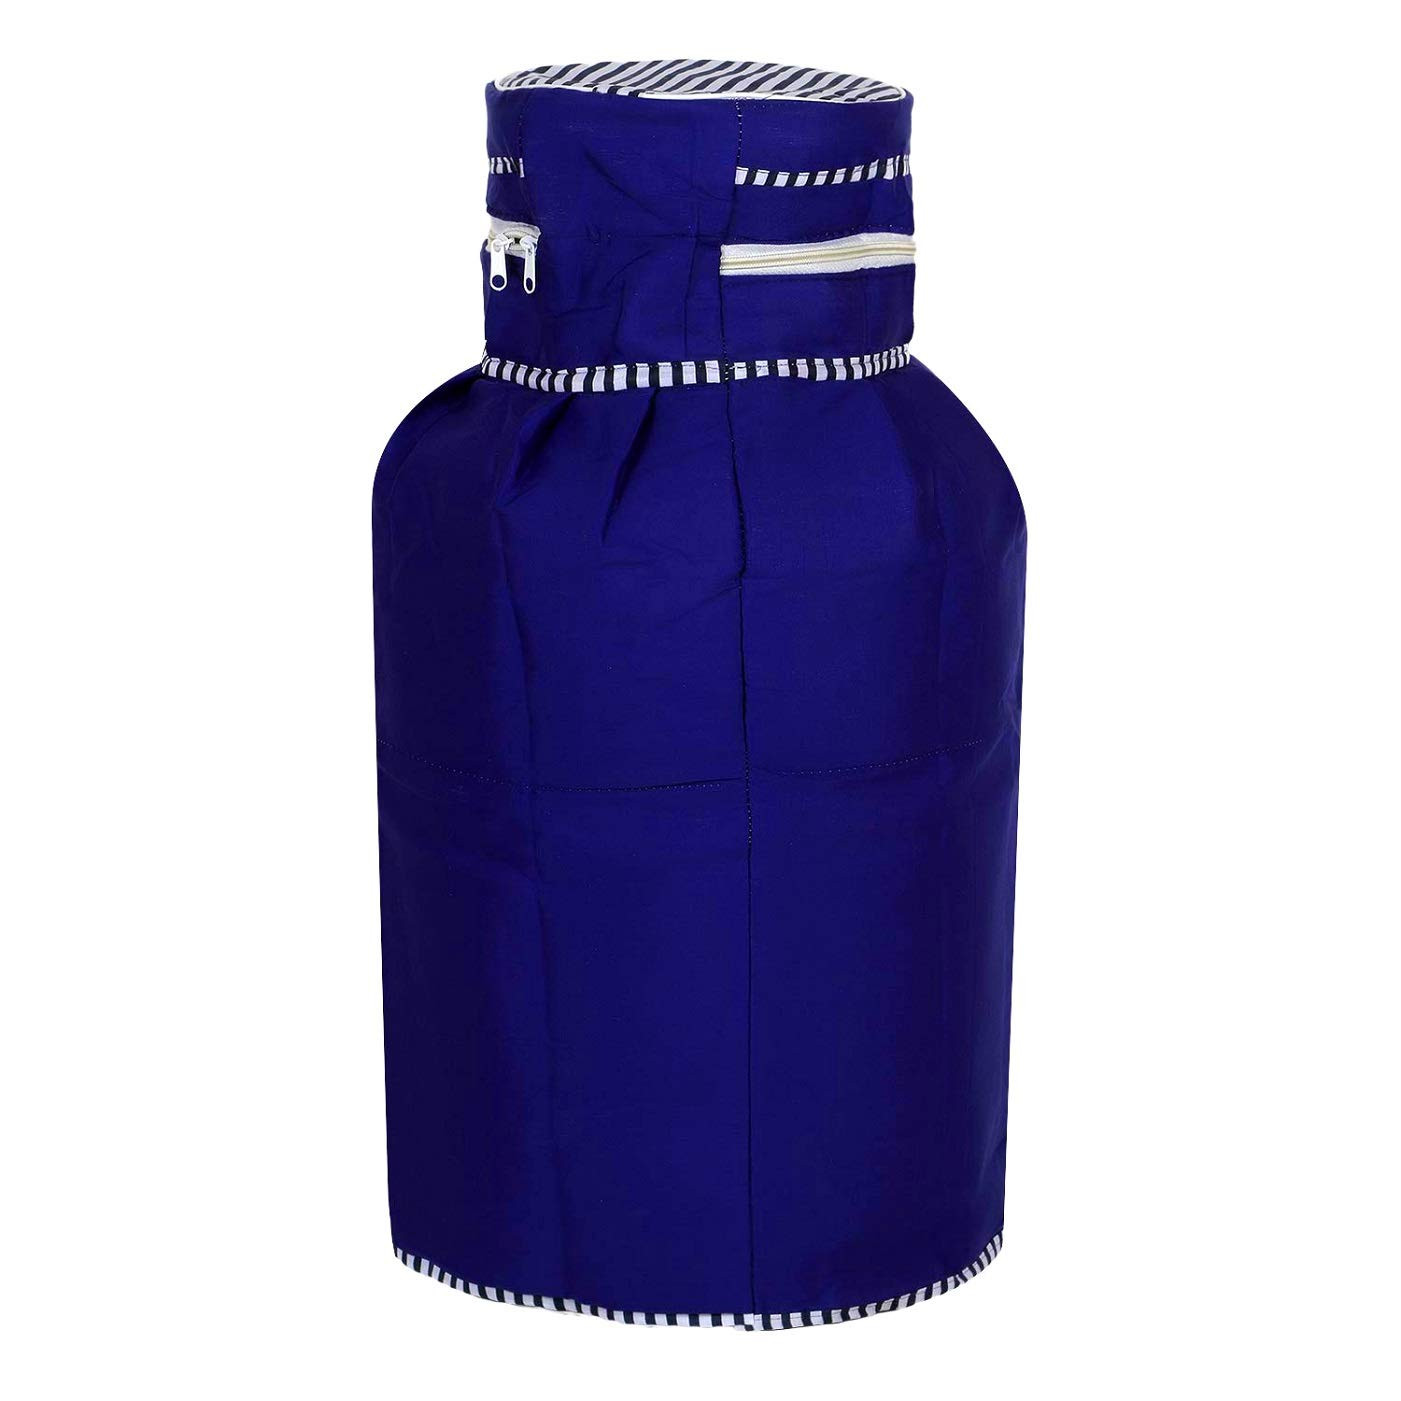 Kuber Industries Cotton Dust-Water Proof LPG Gas Cylinder Fittedsheet Cover (Blue, Standard, CTKTC040750) - 2 Pieces